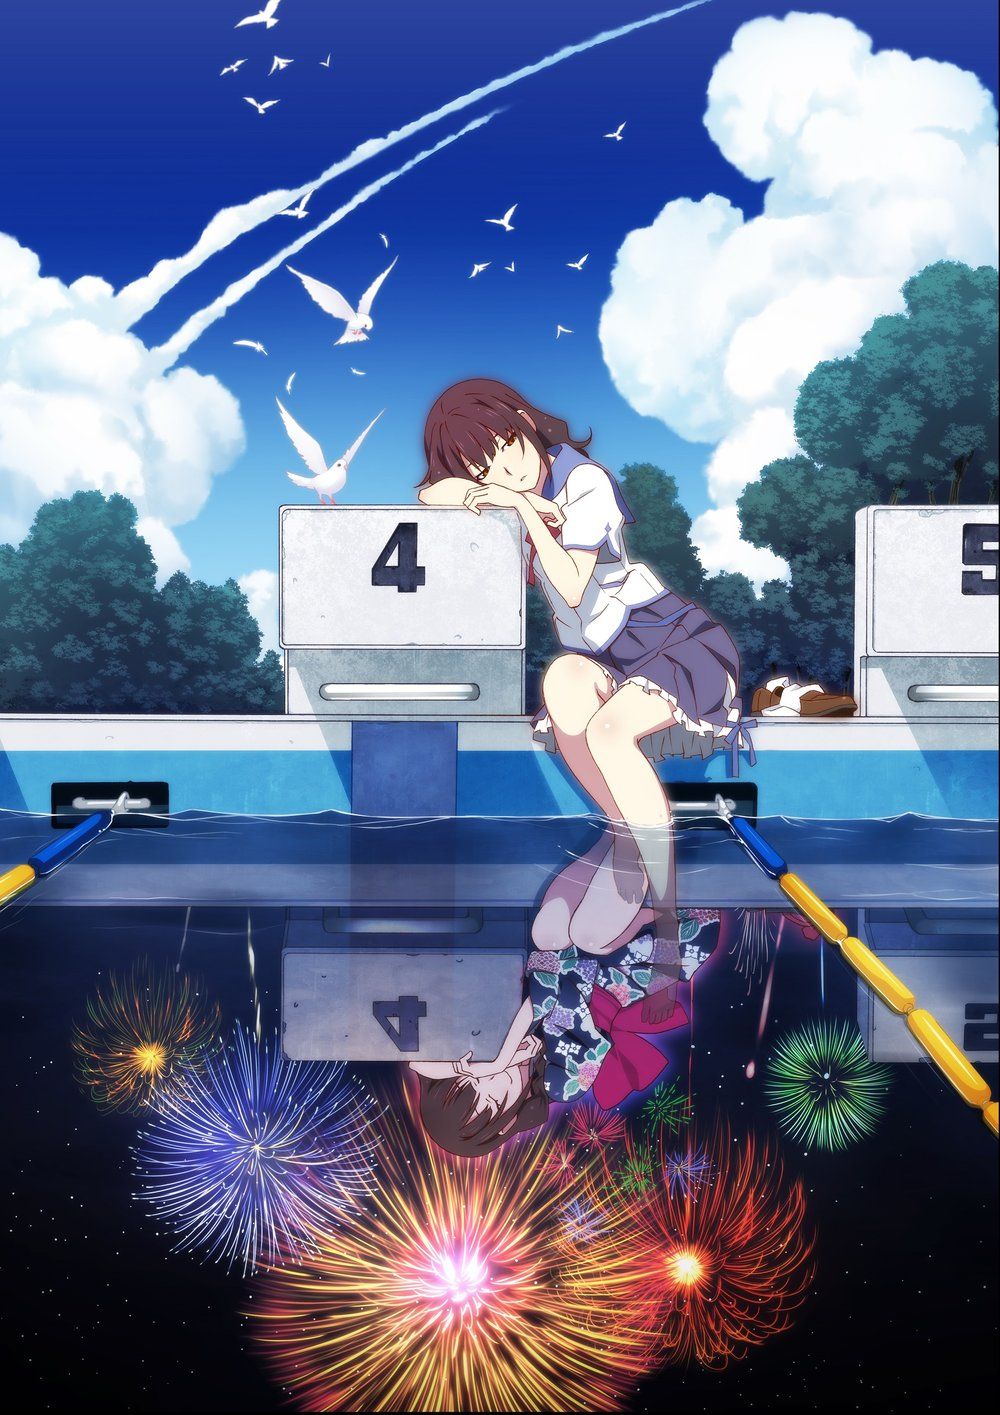 Anime Fireworks Wallpapers